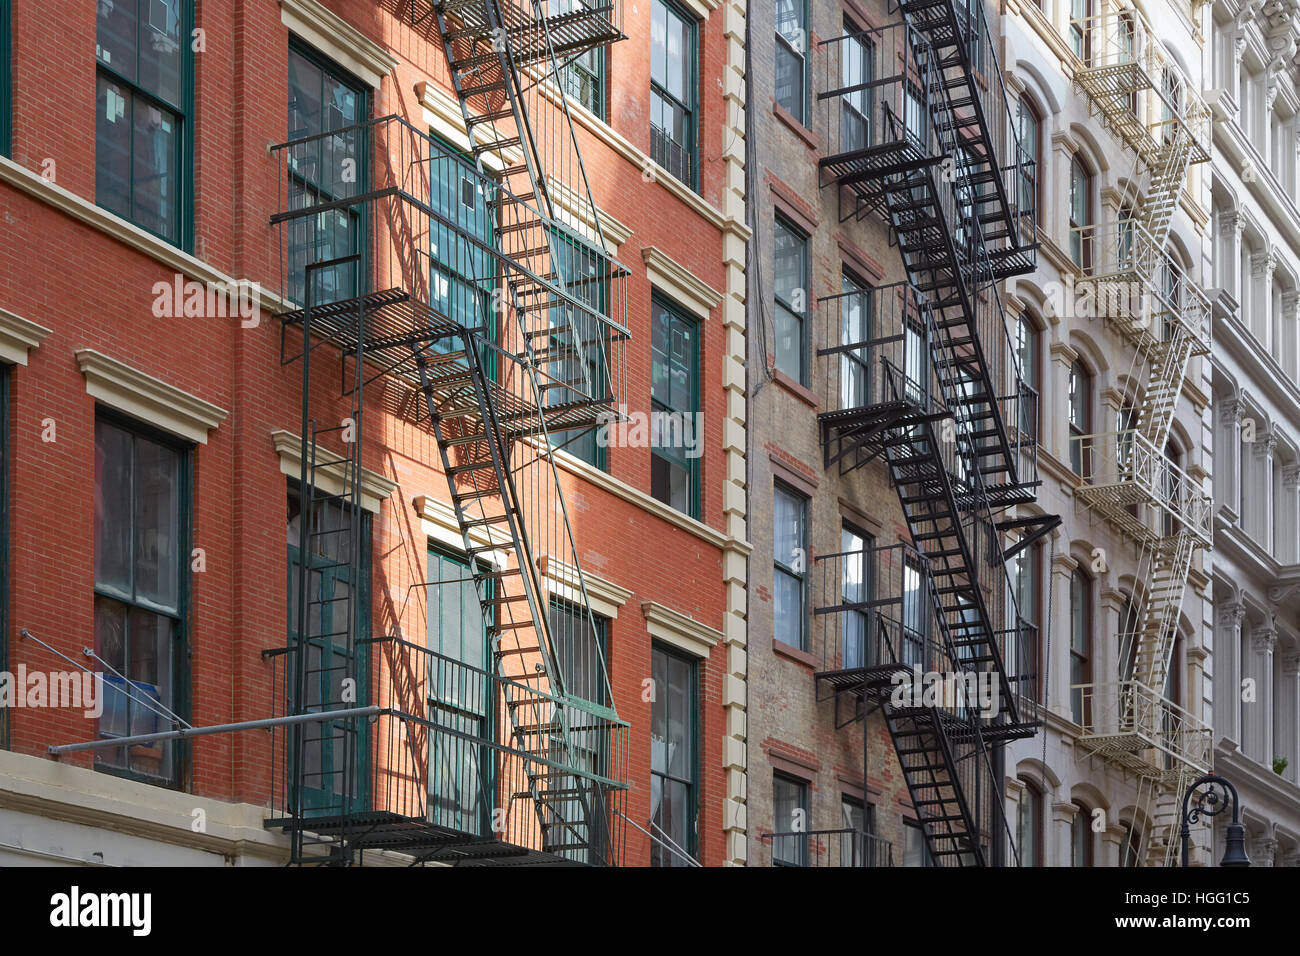 Typical building facades with fire escape stairs, sun beam in Soho, New York Stock Photo